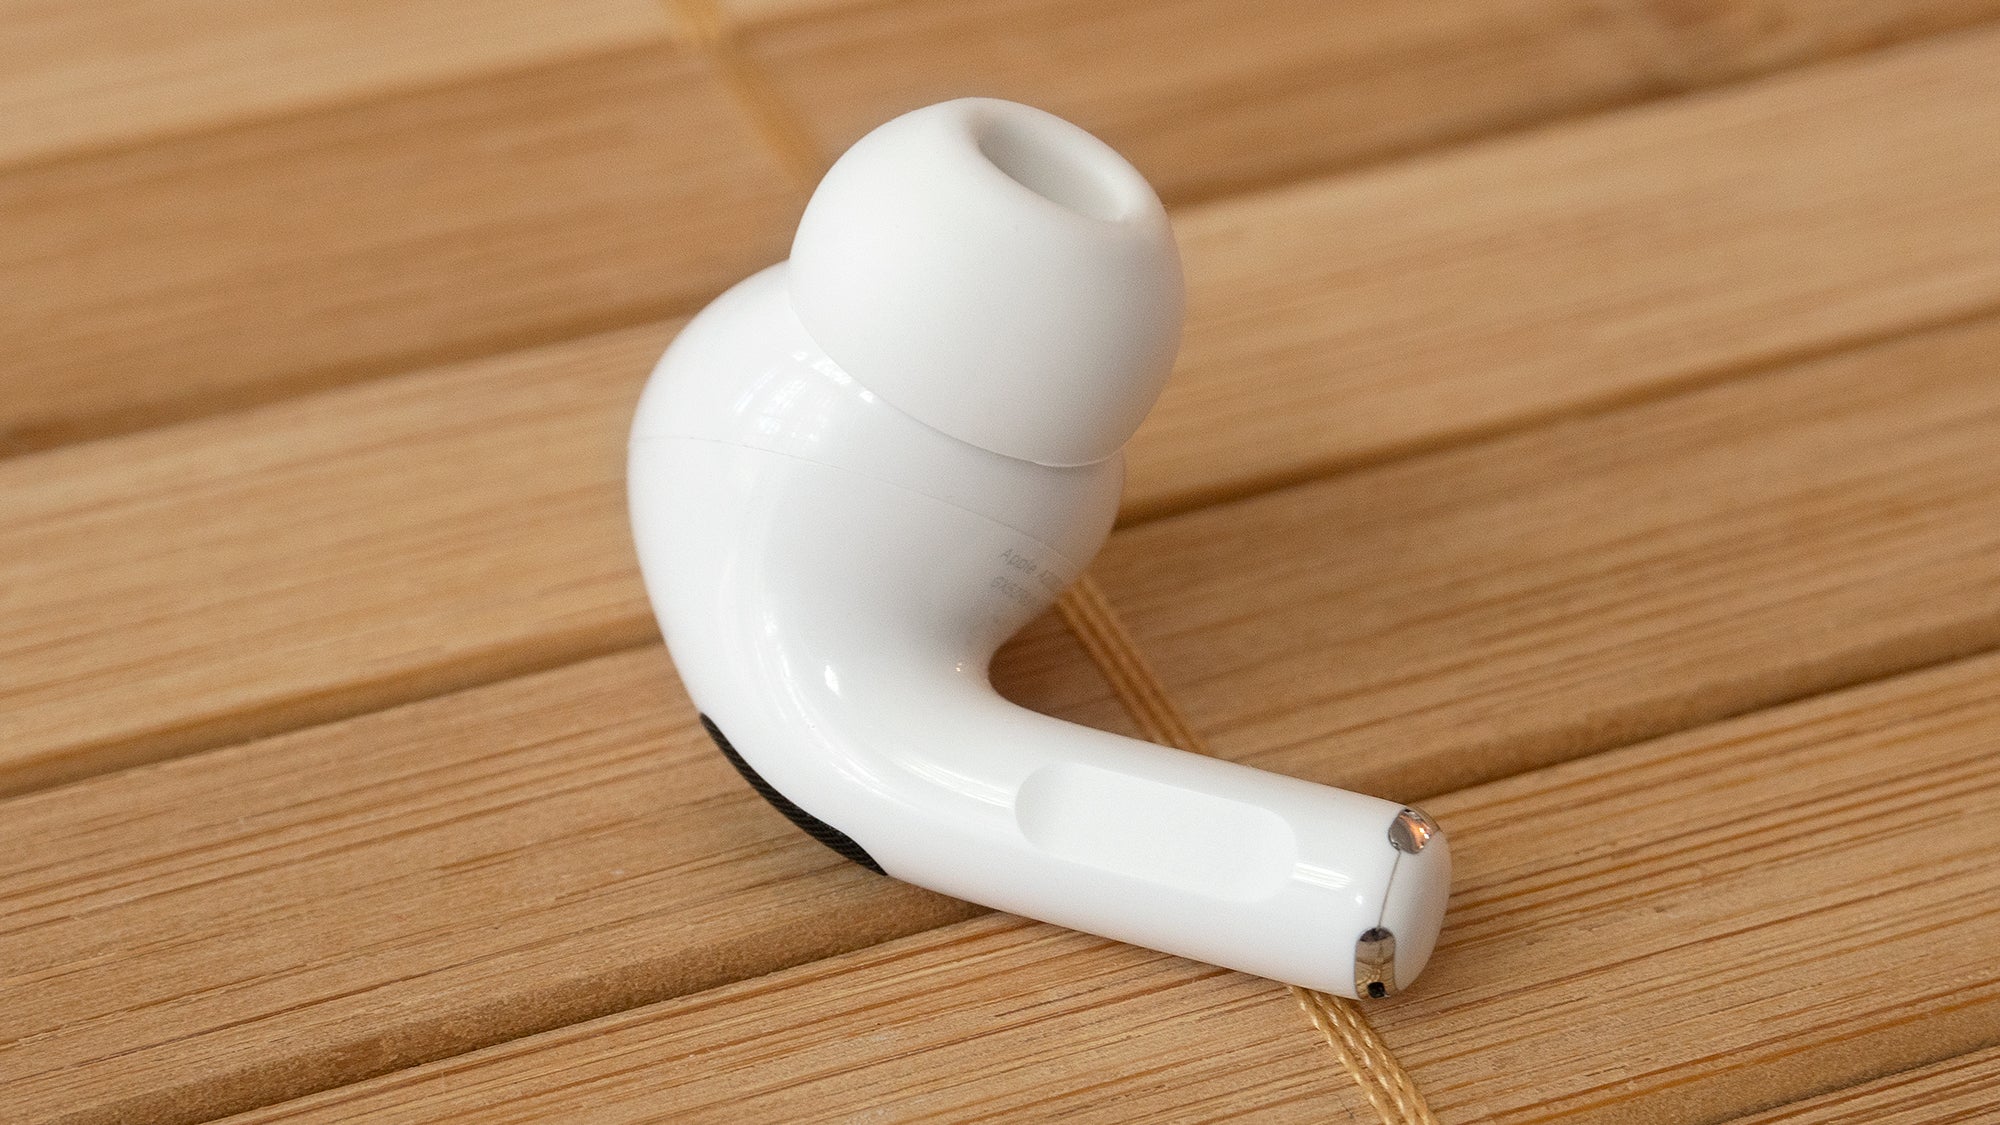 The AirPods Pro 2nd Gen's stem now includes touch controls allowing volume to be adjusted by sliding a finger up and down them. (Photo: Andrew Liszewski | Gizmodo)